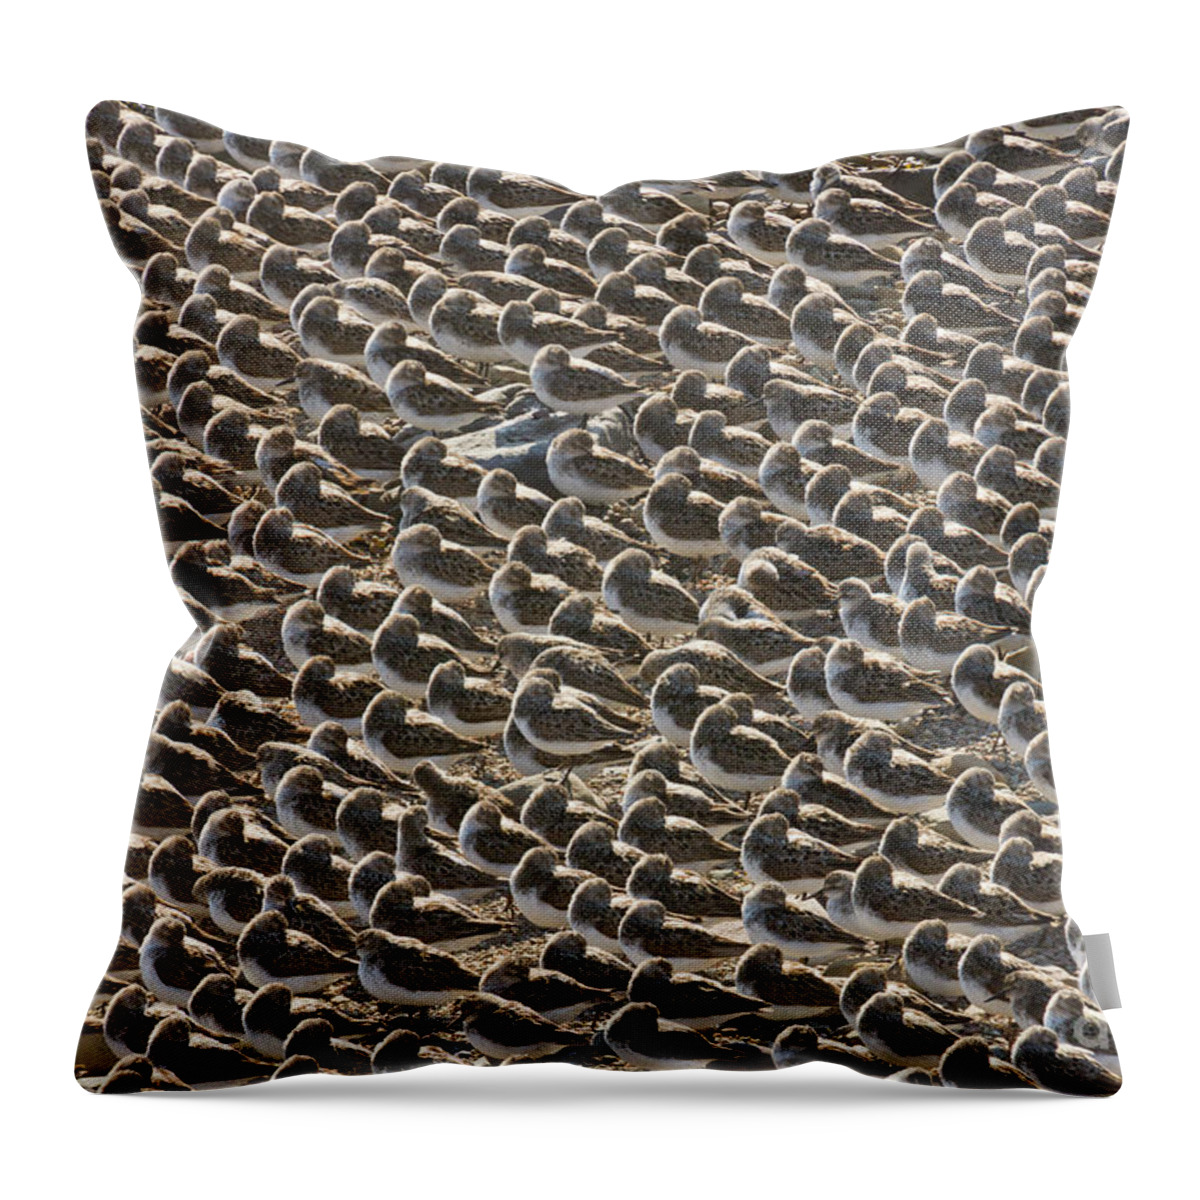 00536652 Throw Pillow featuring the photograph Semipalmated Sandpipers Sleeping by Yva Momatiuk John Eastcott